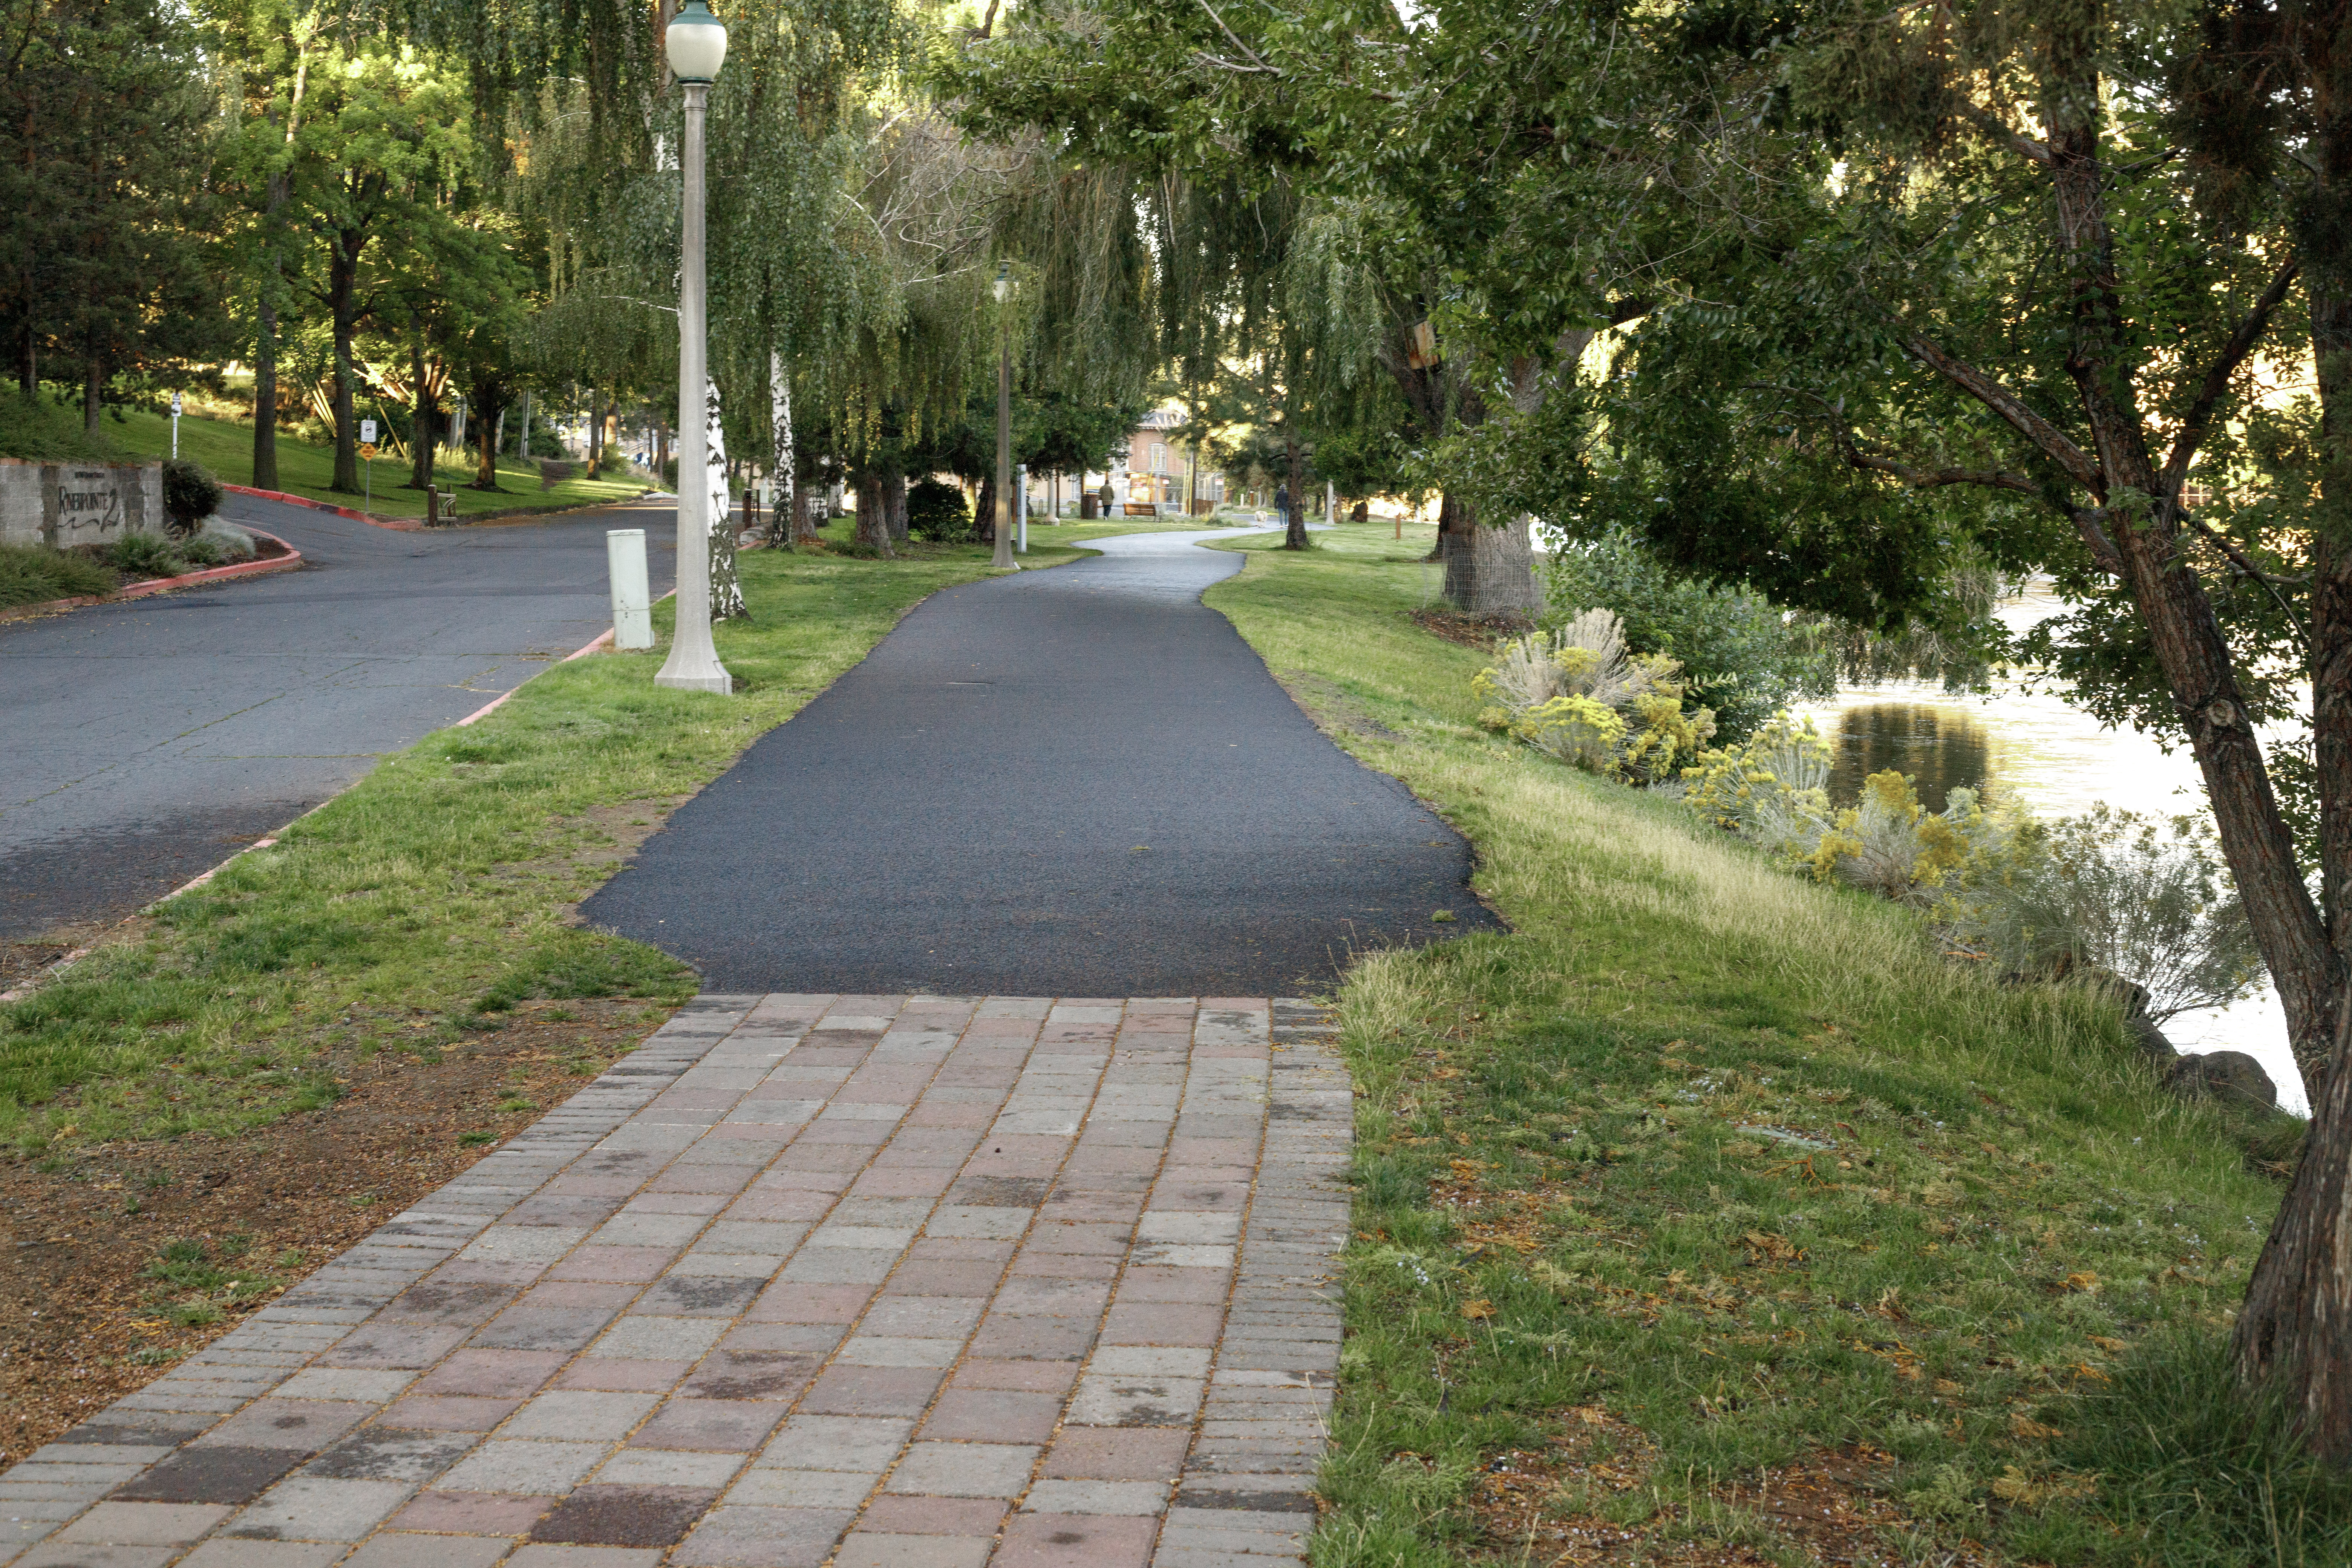 Pathway at the park entrance